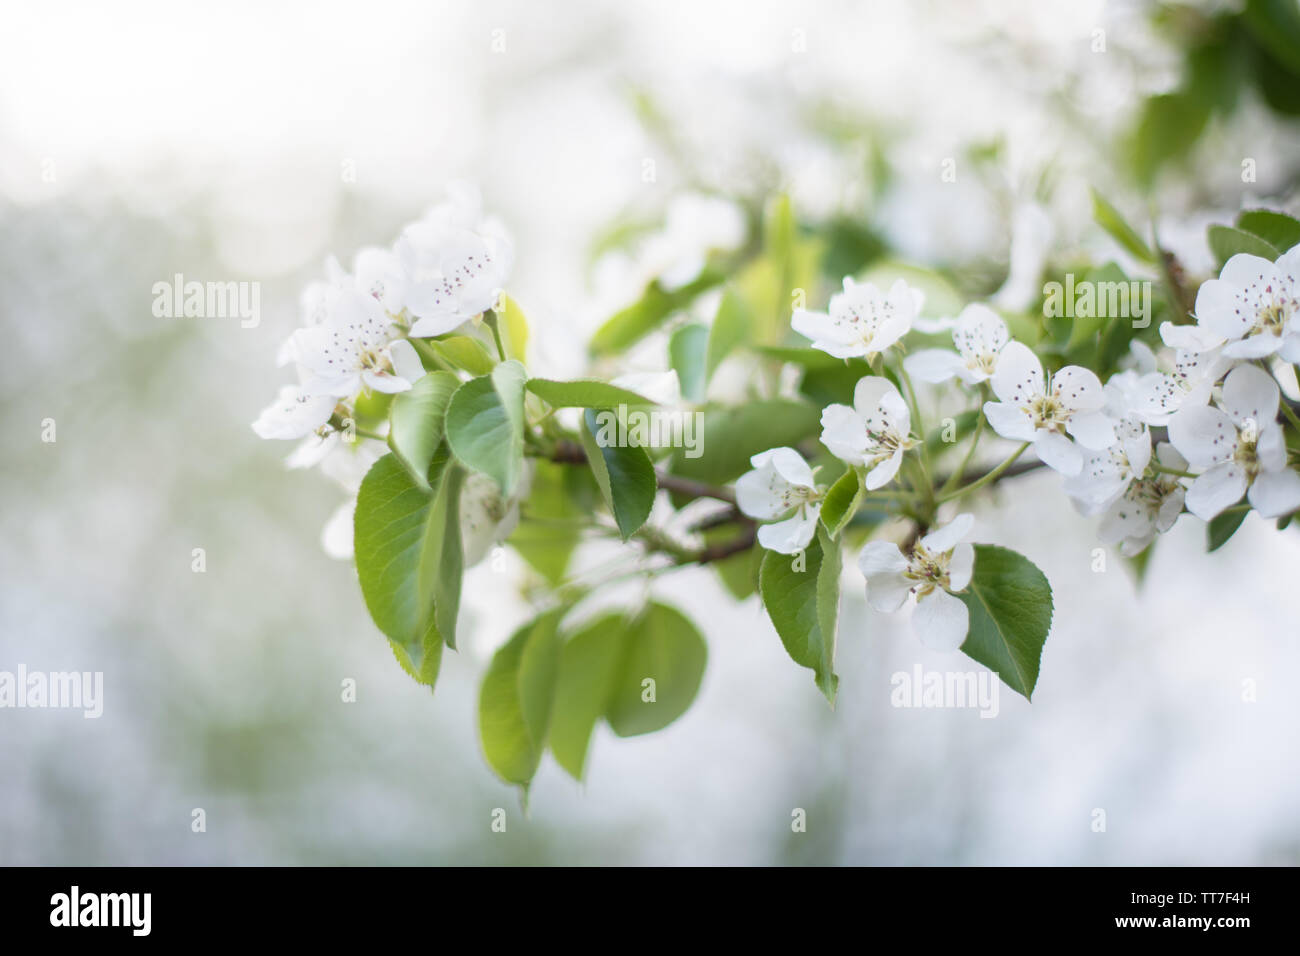 Blooming white flowers fruit tree: Apple, pear in the garden in early spring. Horizontal photography Stock Photo